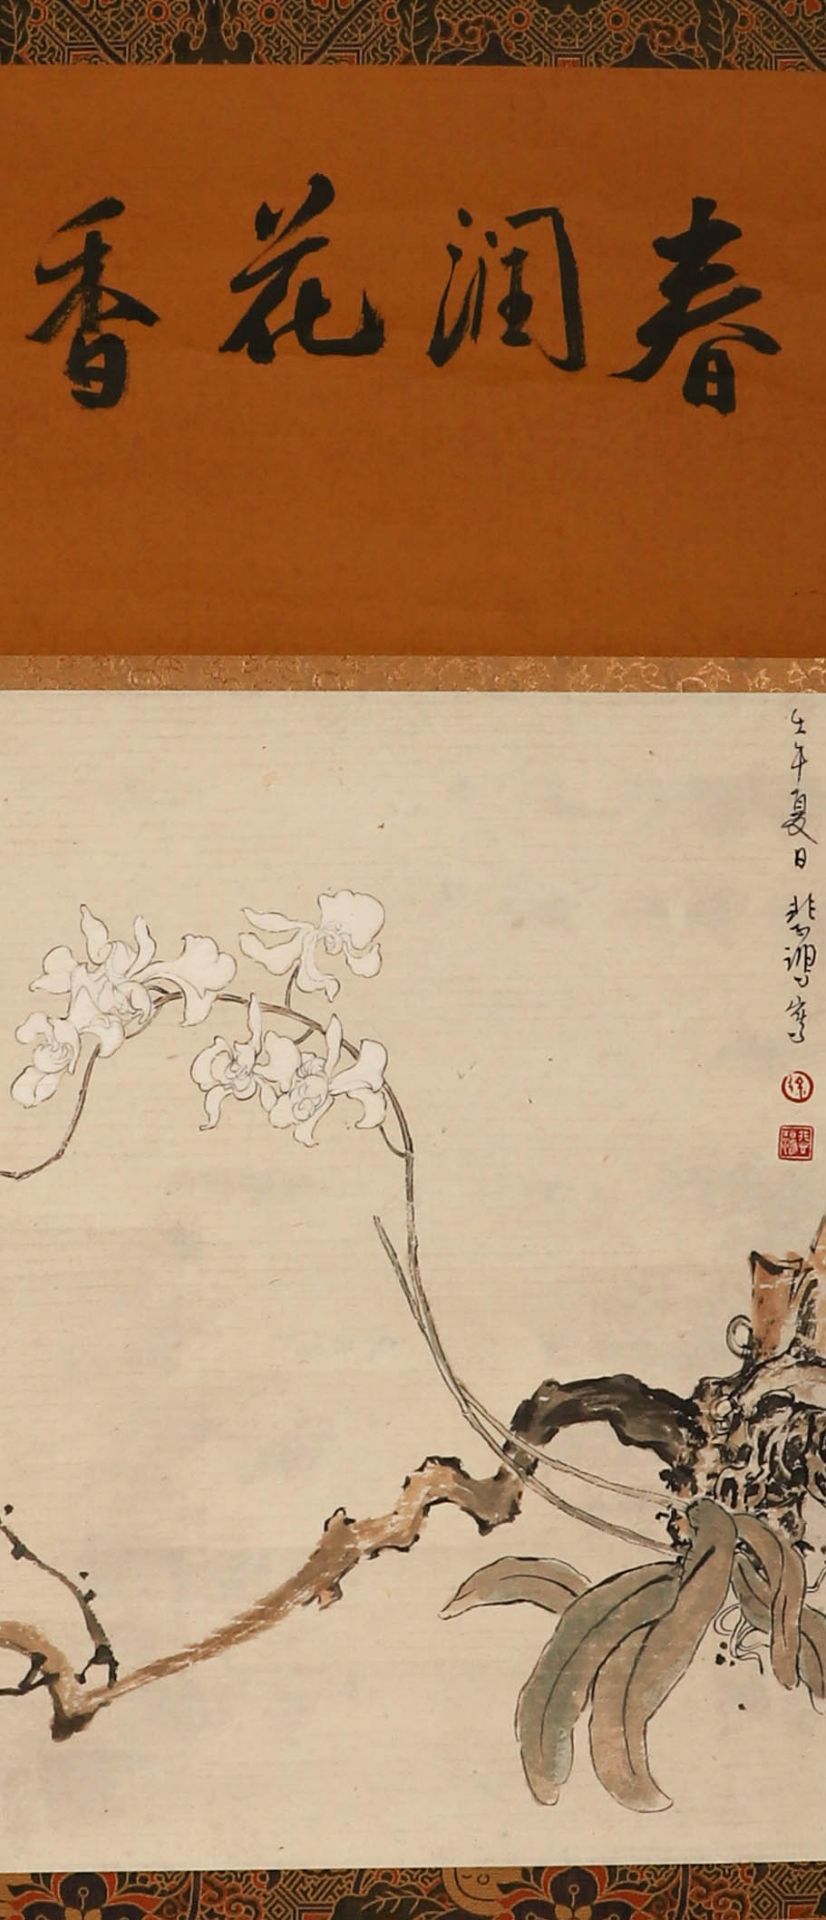 Flowers painting on paper by Xu Beihong  - Image 8 of 22